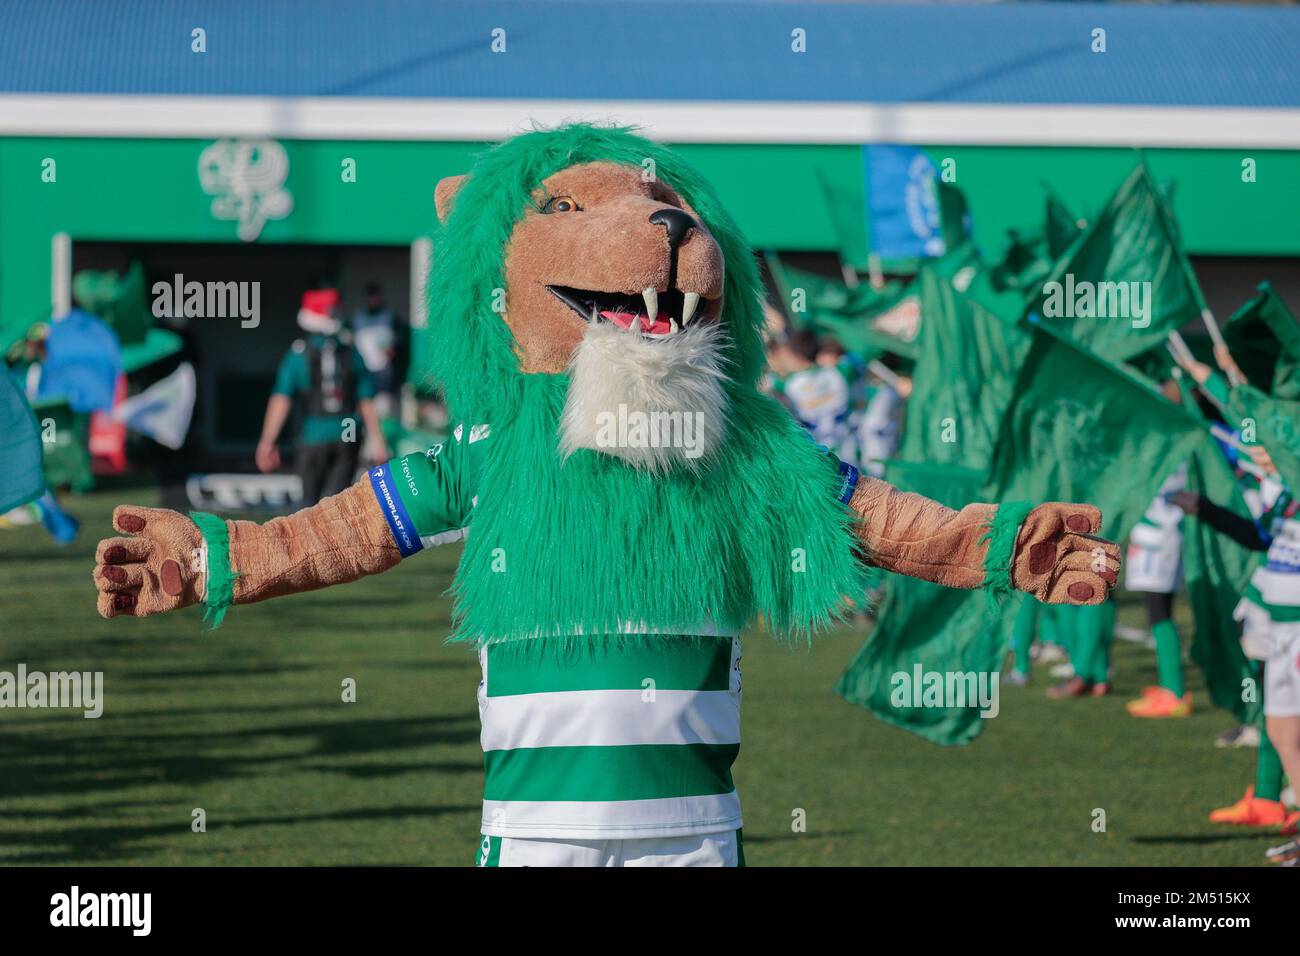 Treviso, Italia. 24th Dec, 2022. Benetton Mascotte durante Benetton Rugby vs Zebre Rugby Club, partita United Rugby Championship a Treviso, Italia, dicembre 24 2022 Credit: Independent Photo Agency/Alamy Live News Foto Stock